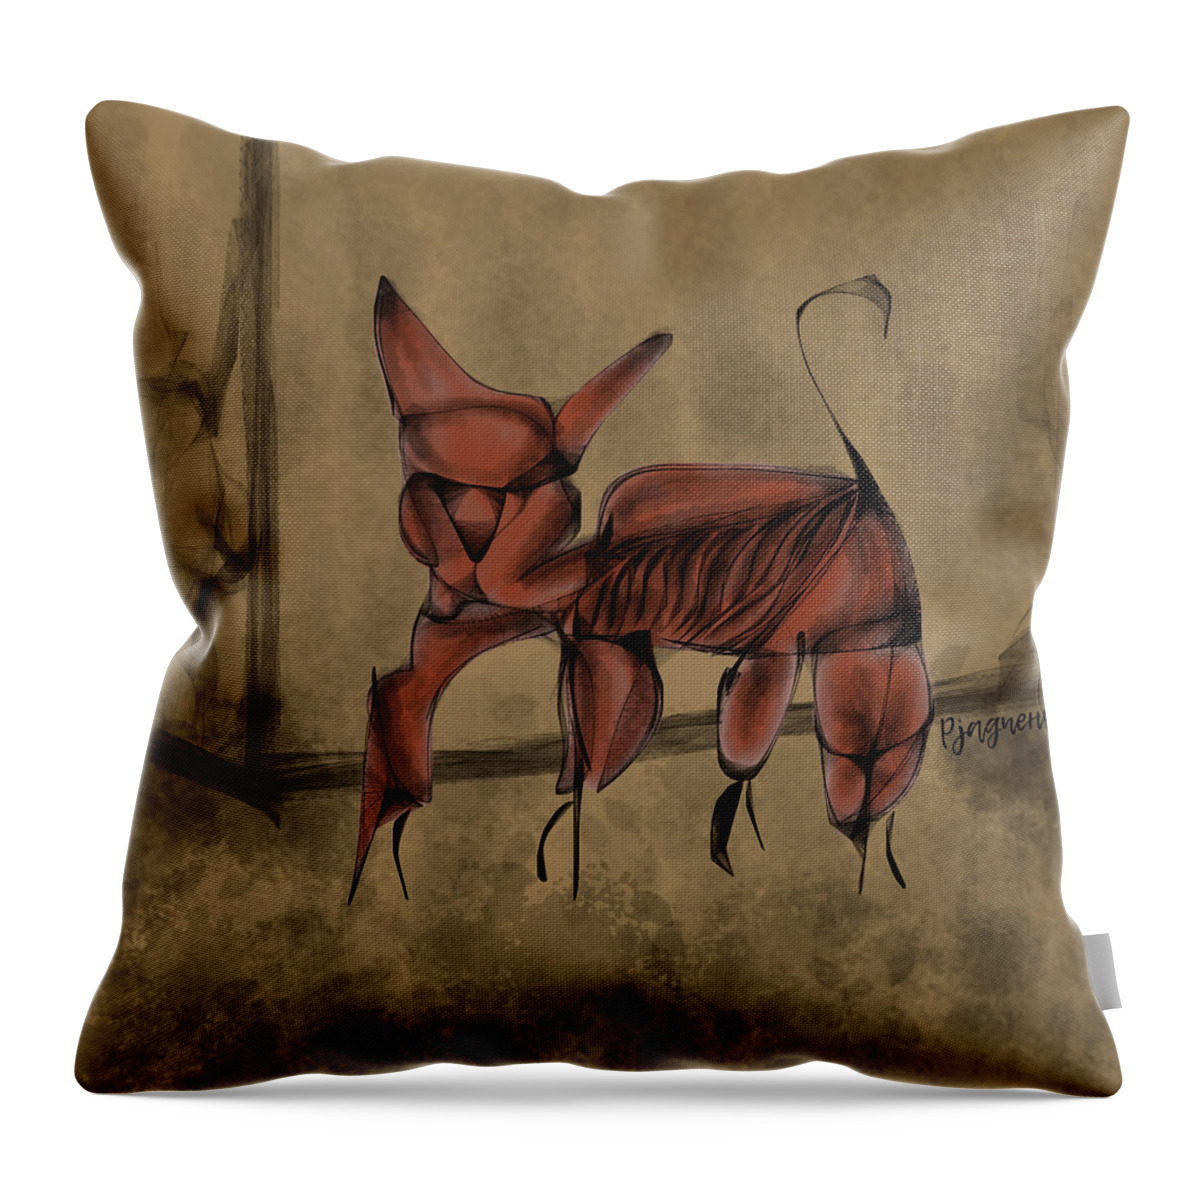 Cat Throw Pillow featuring the digital art Searching for justice by Ljev Rjadcenko